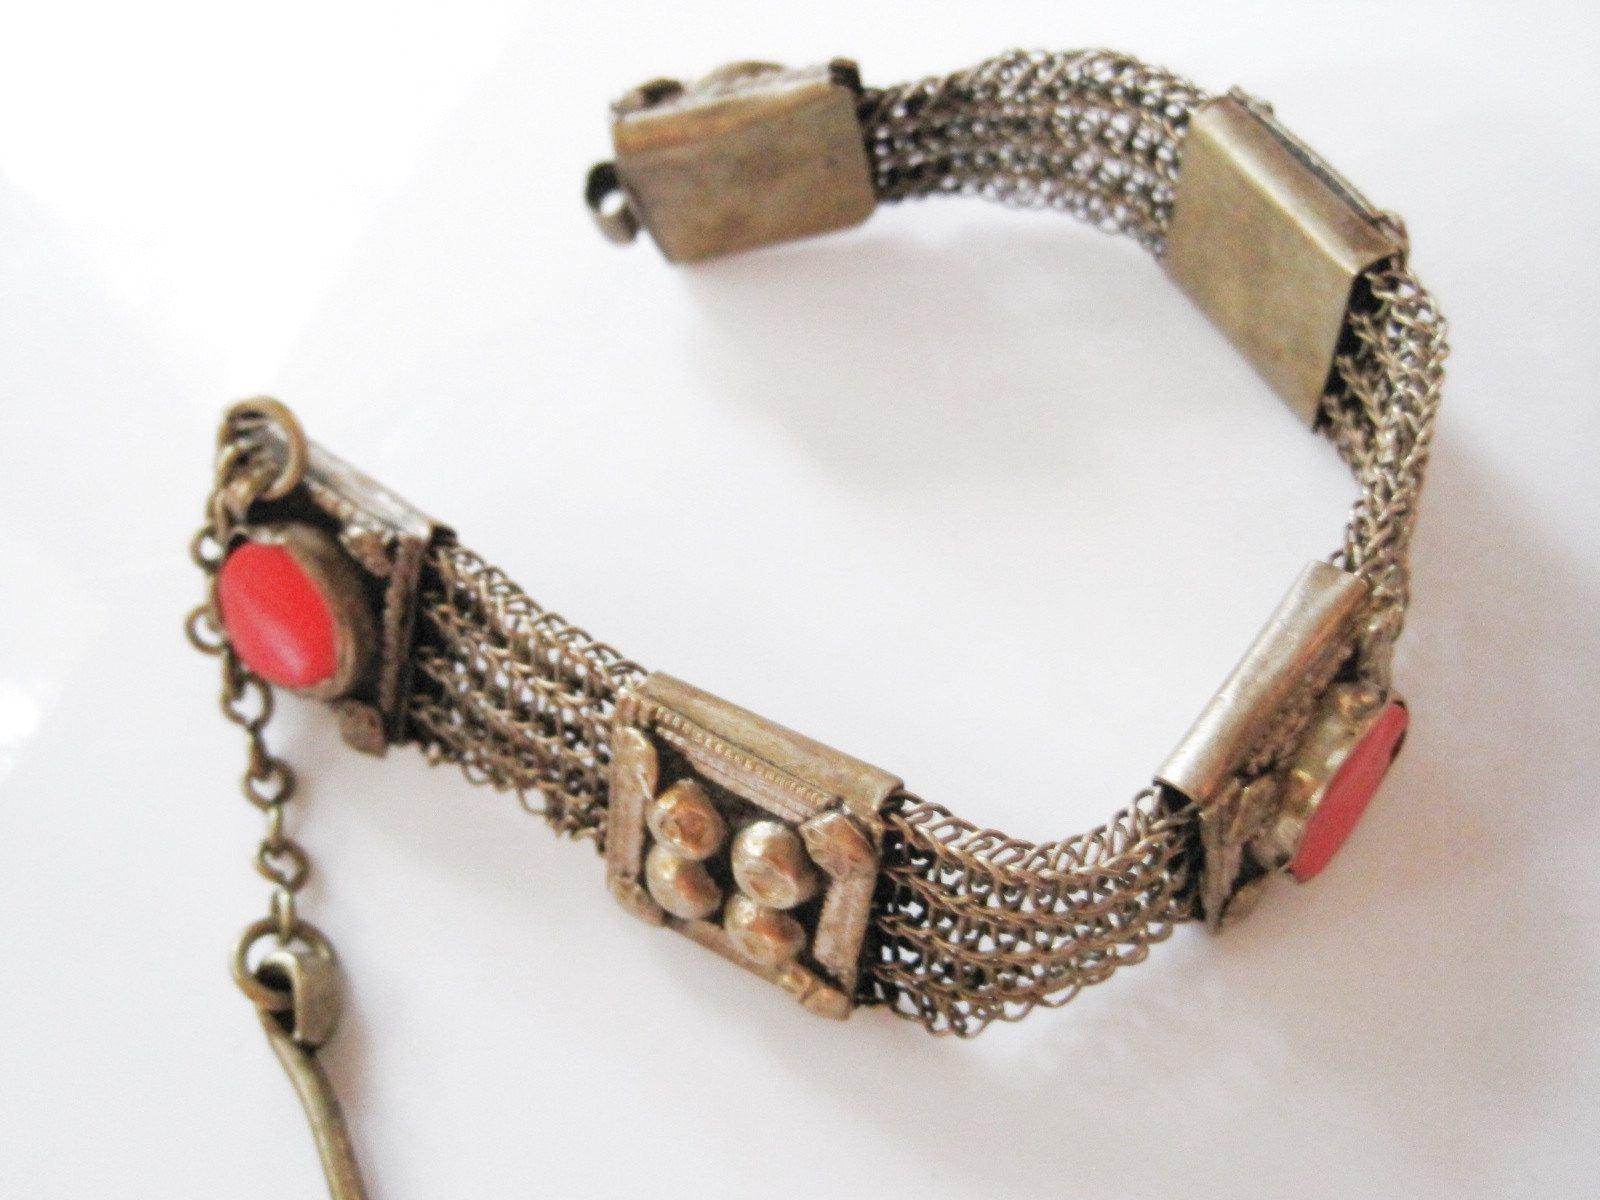 Old Large Metal Mesh Bedouin Bracelet with Red Glass from the Arabian Peninsula - Anteeka